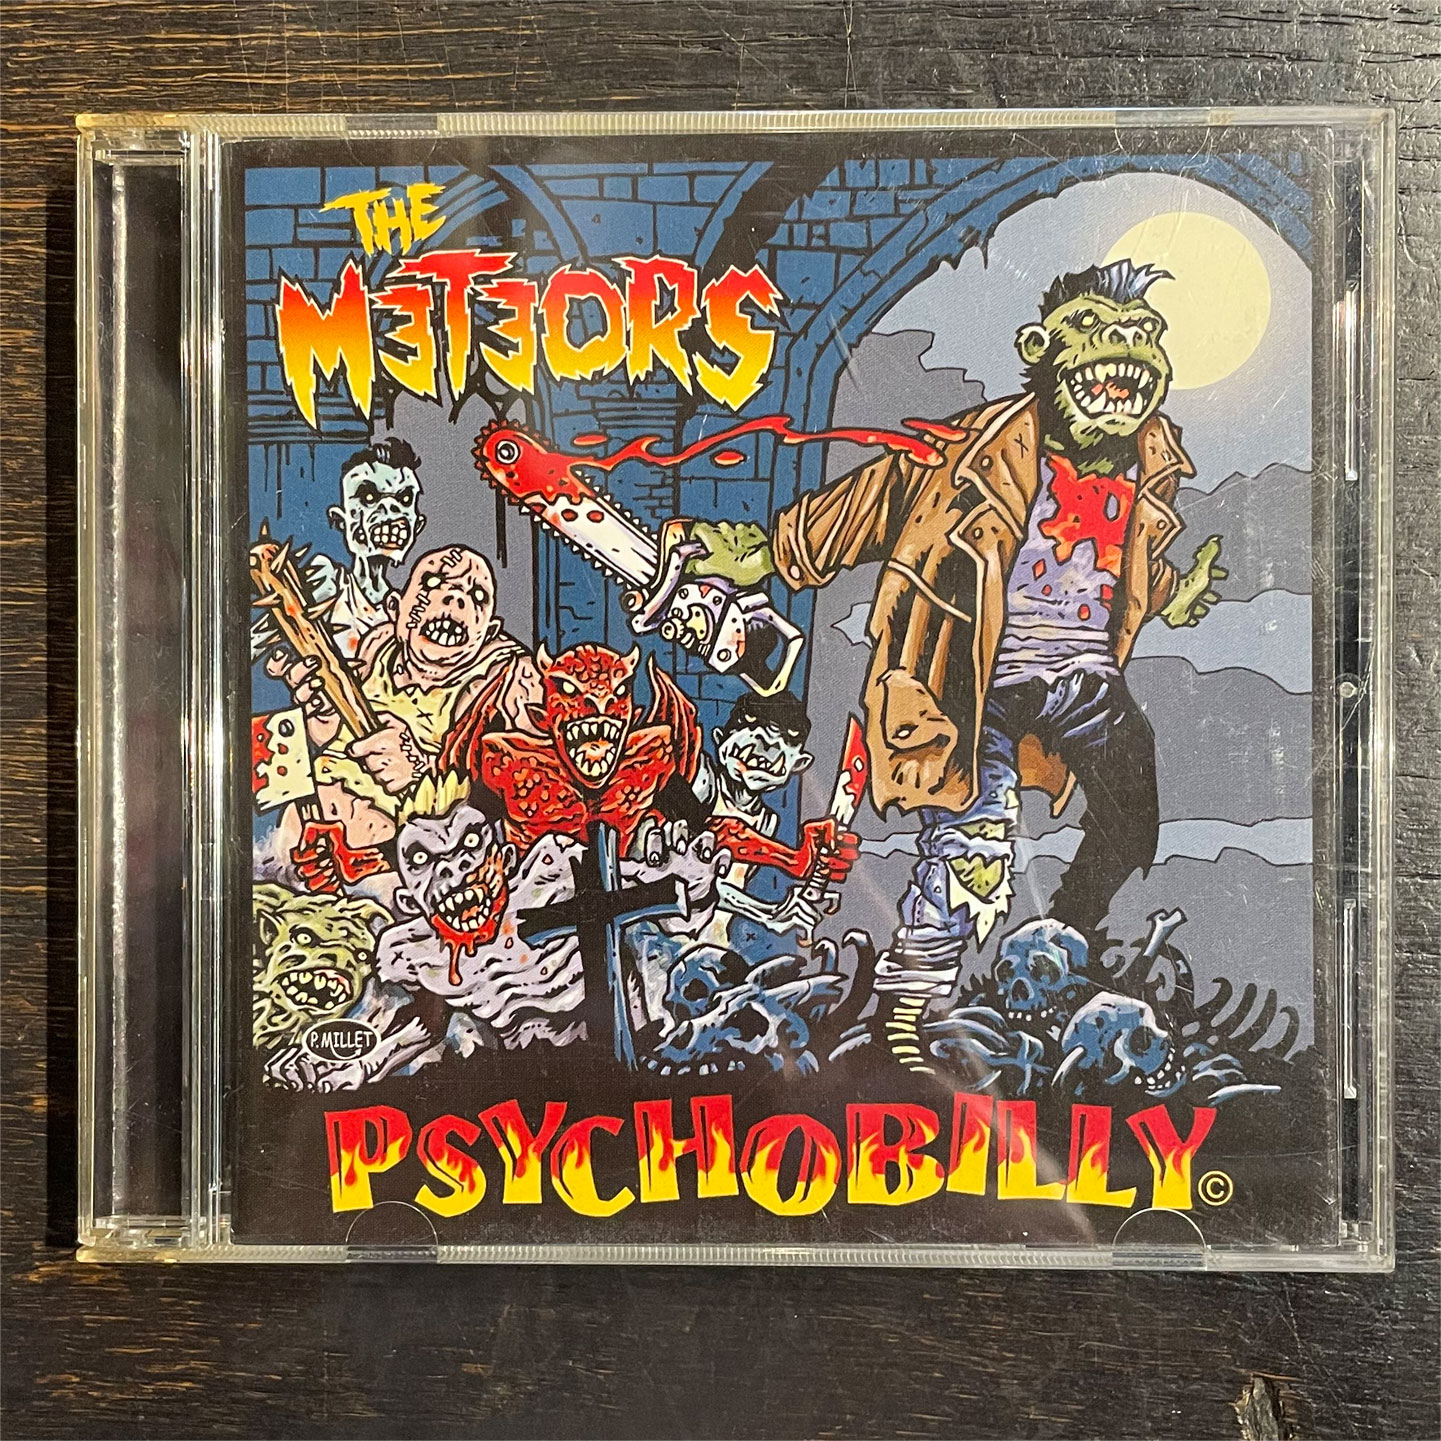 USED! THE METEORS CD PSYCHOBILLY